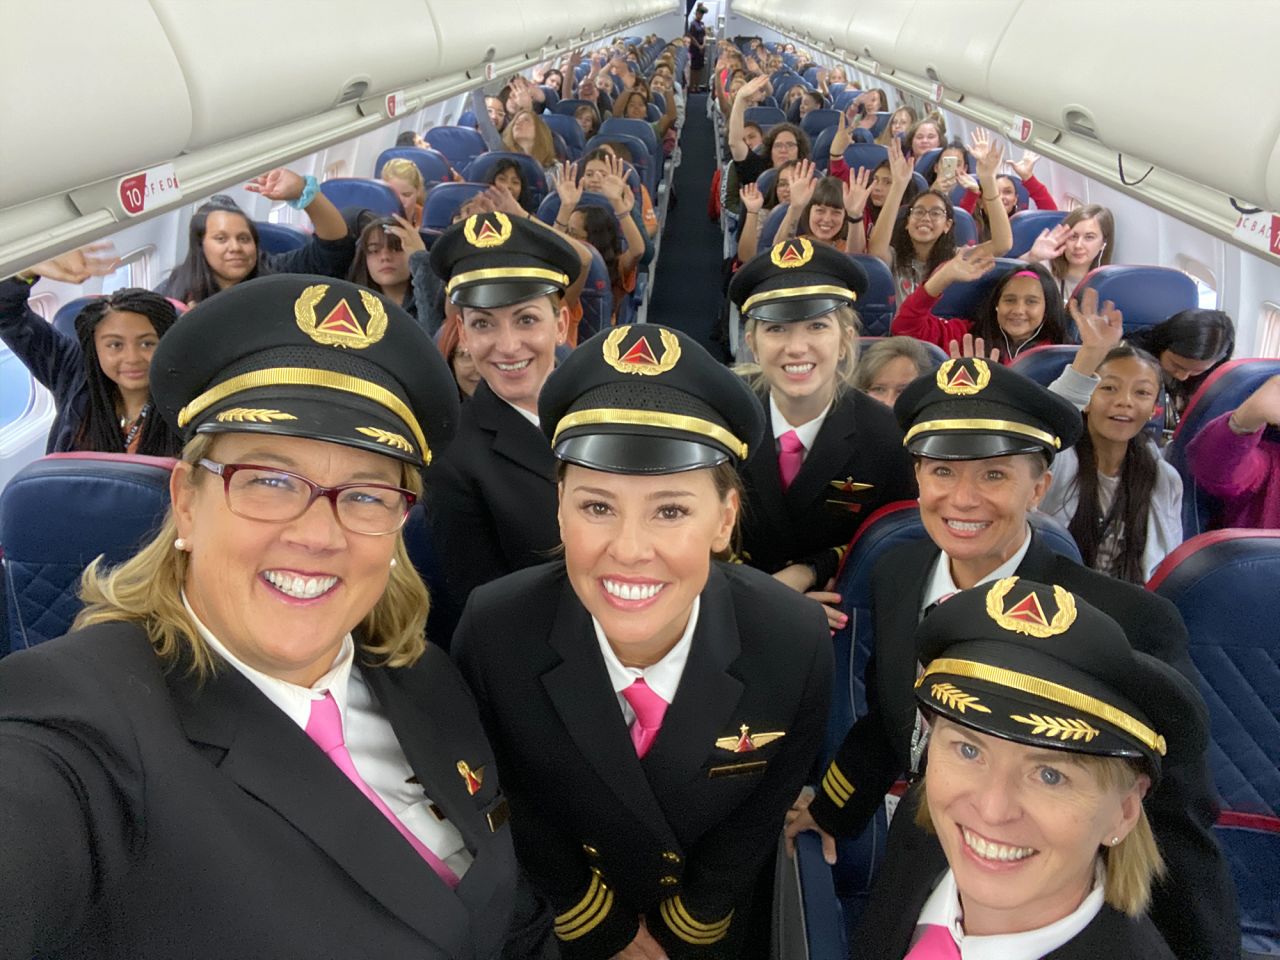 Delta celebrated International Girls in Aviation Day by carrying 120 girls from Salt Lake City to Houston for a tour of NASA.
